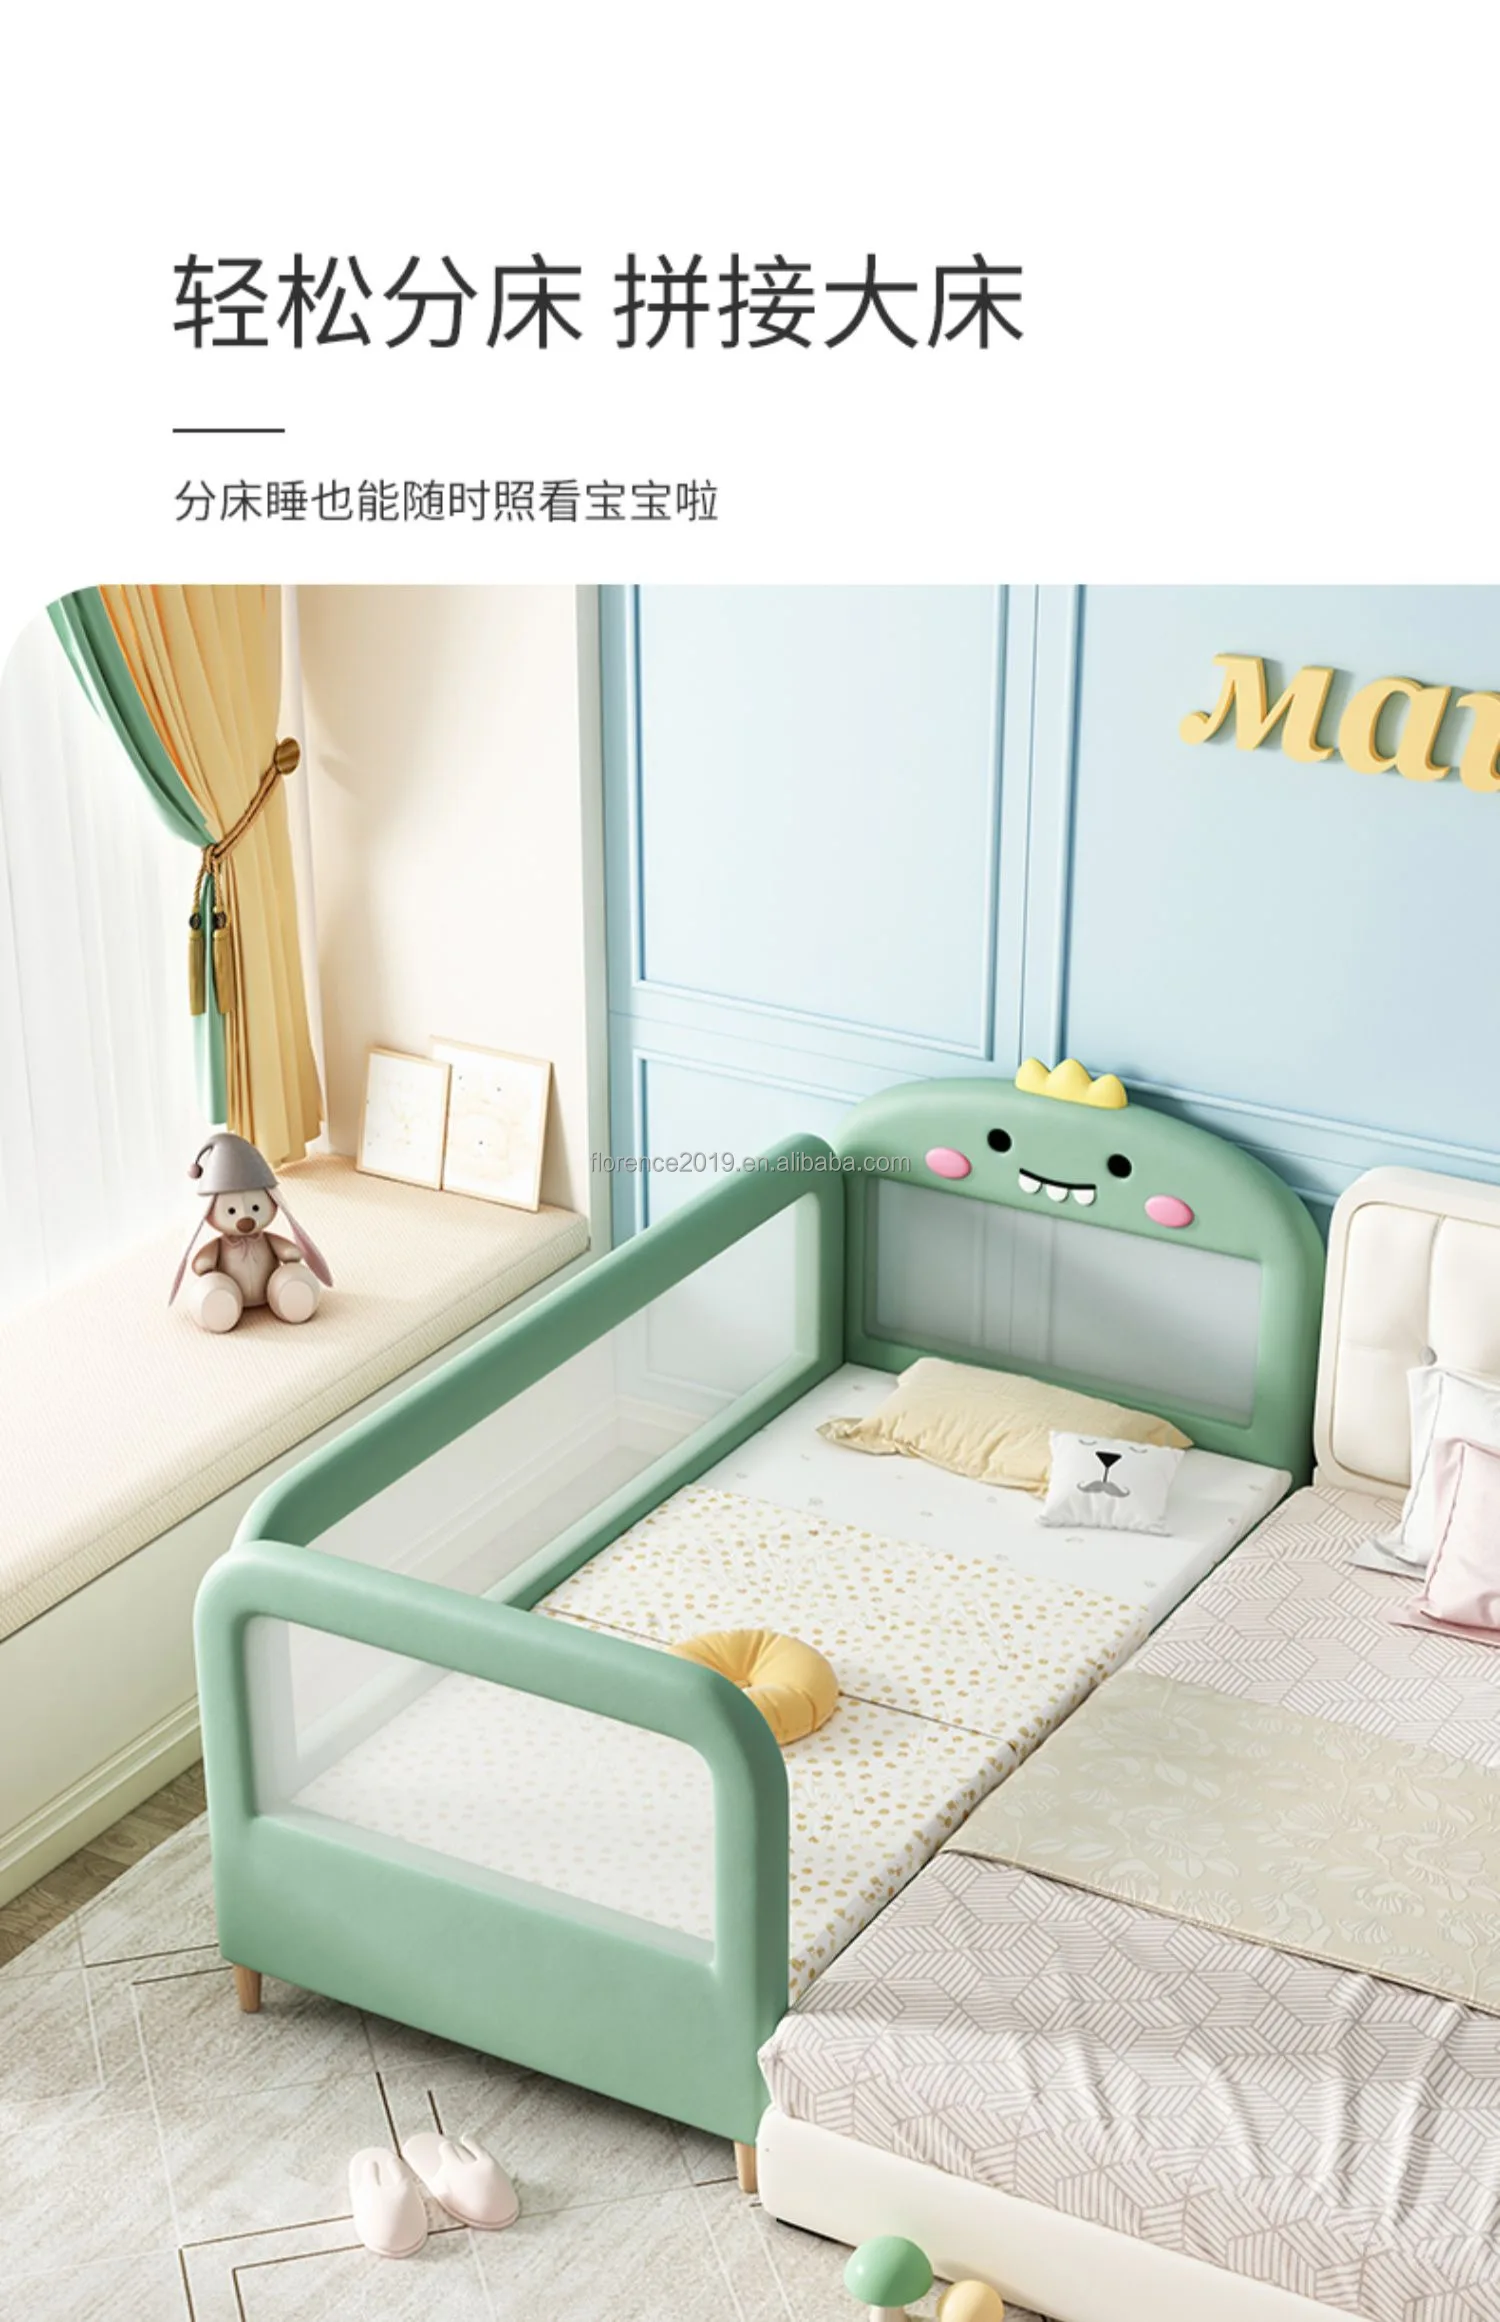 Kids Beds Fashion Children Beds For 7 Years One Bedroom Two Bed Room Child 2 Levels Buy Children Beds For 7 Years Kids Beds Children S Bed Bunk Bed Solid Wood Double